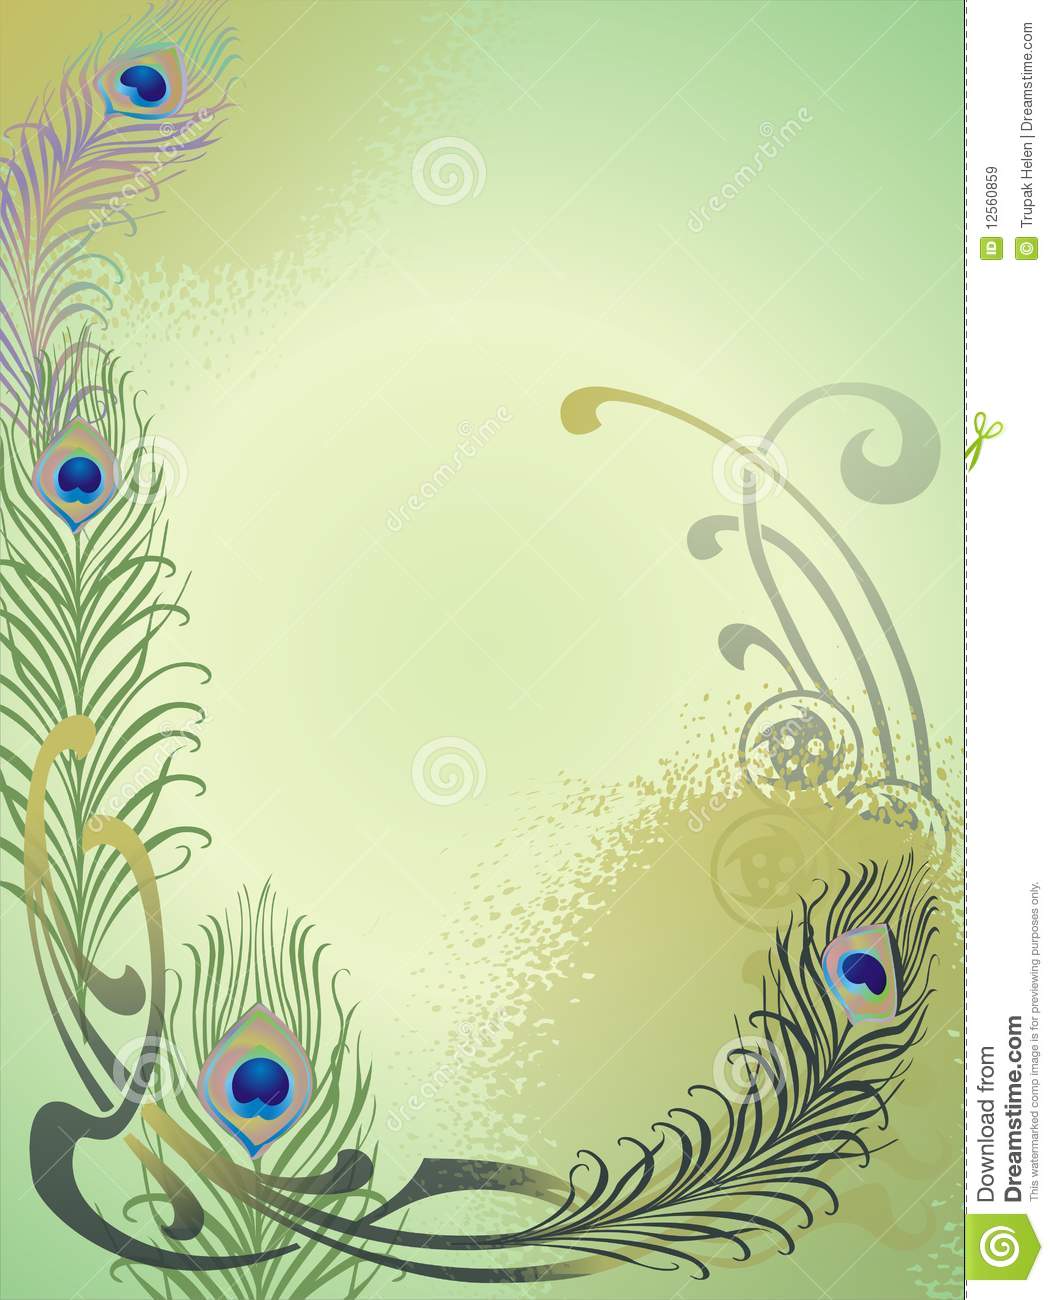 Peacock Feather Border Clipart Peacock Feathers 1